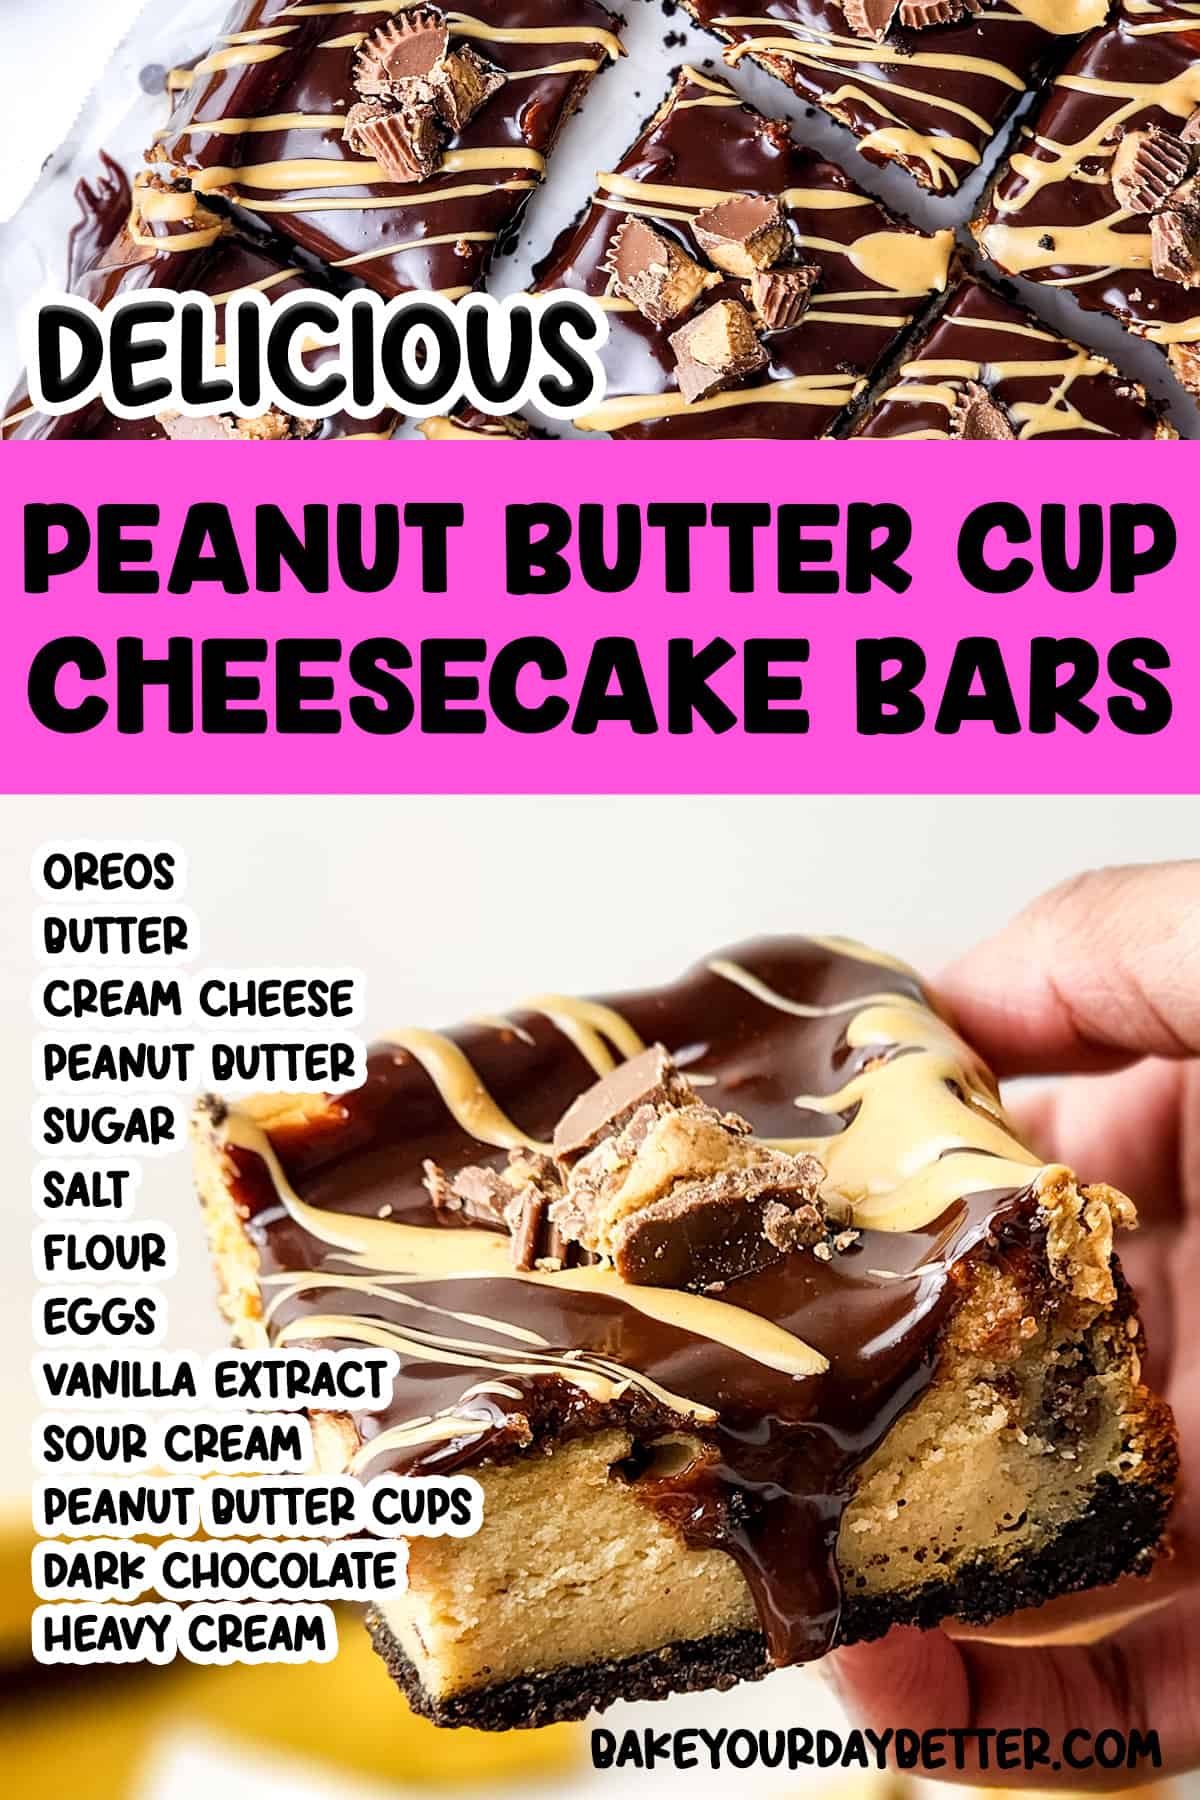 pictures of peanut butter cup cheesecake bars with text overlay of ingredients list